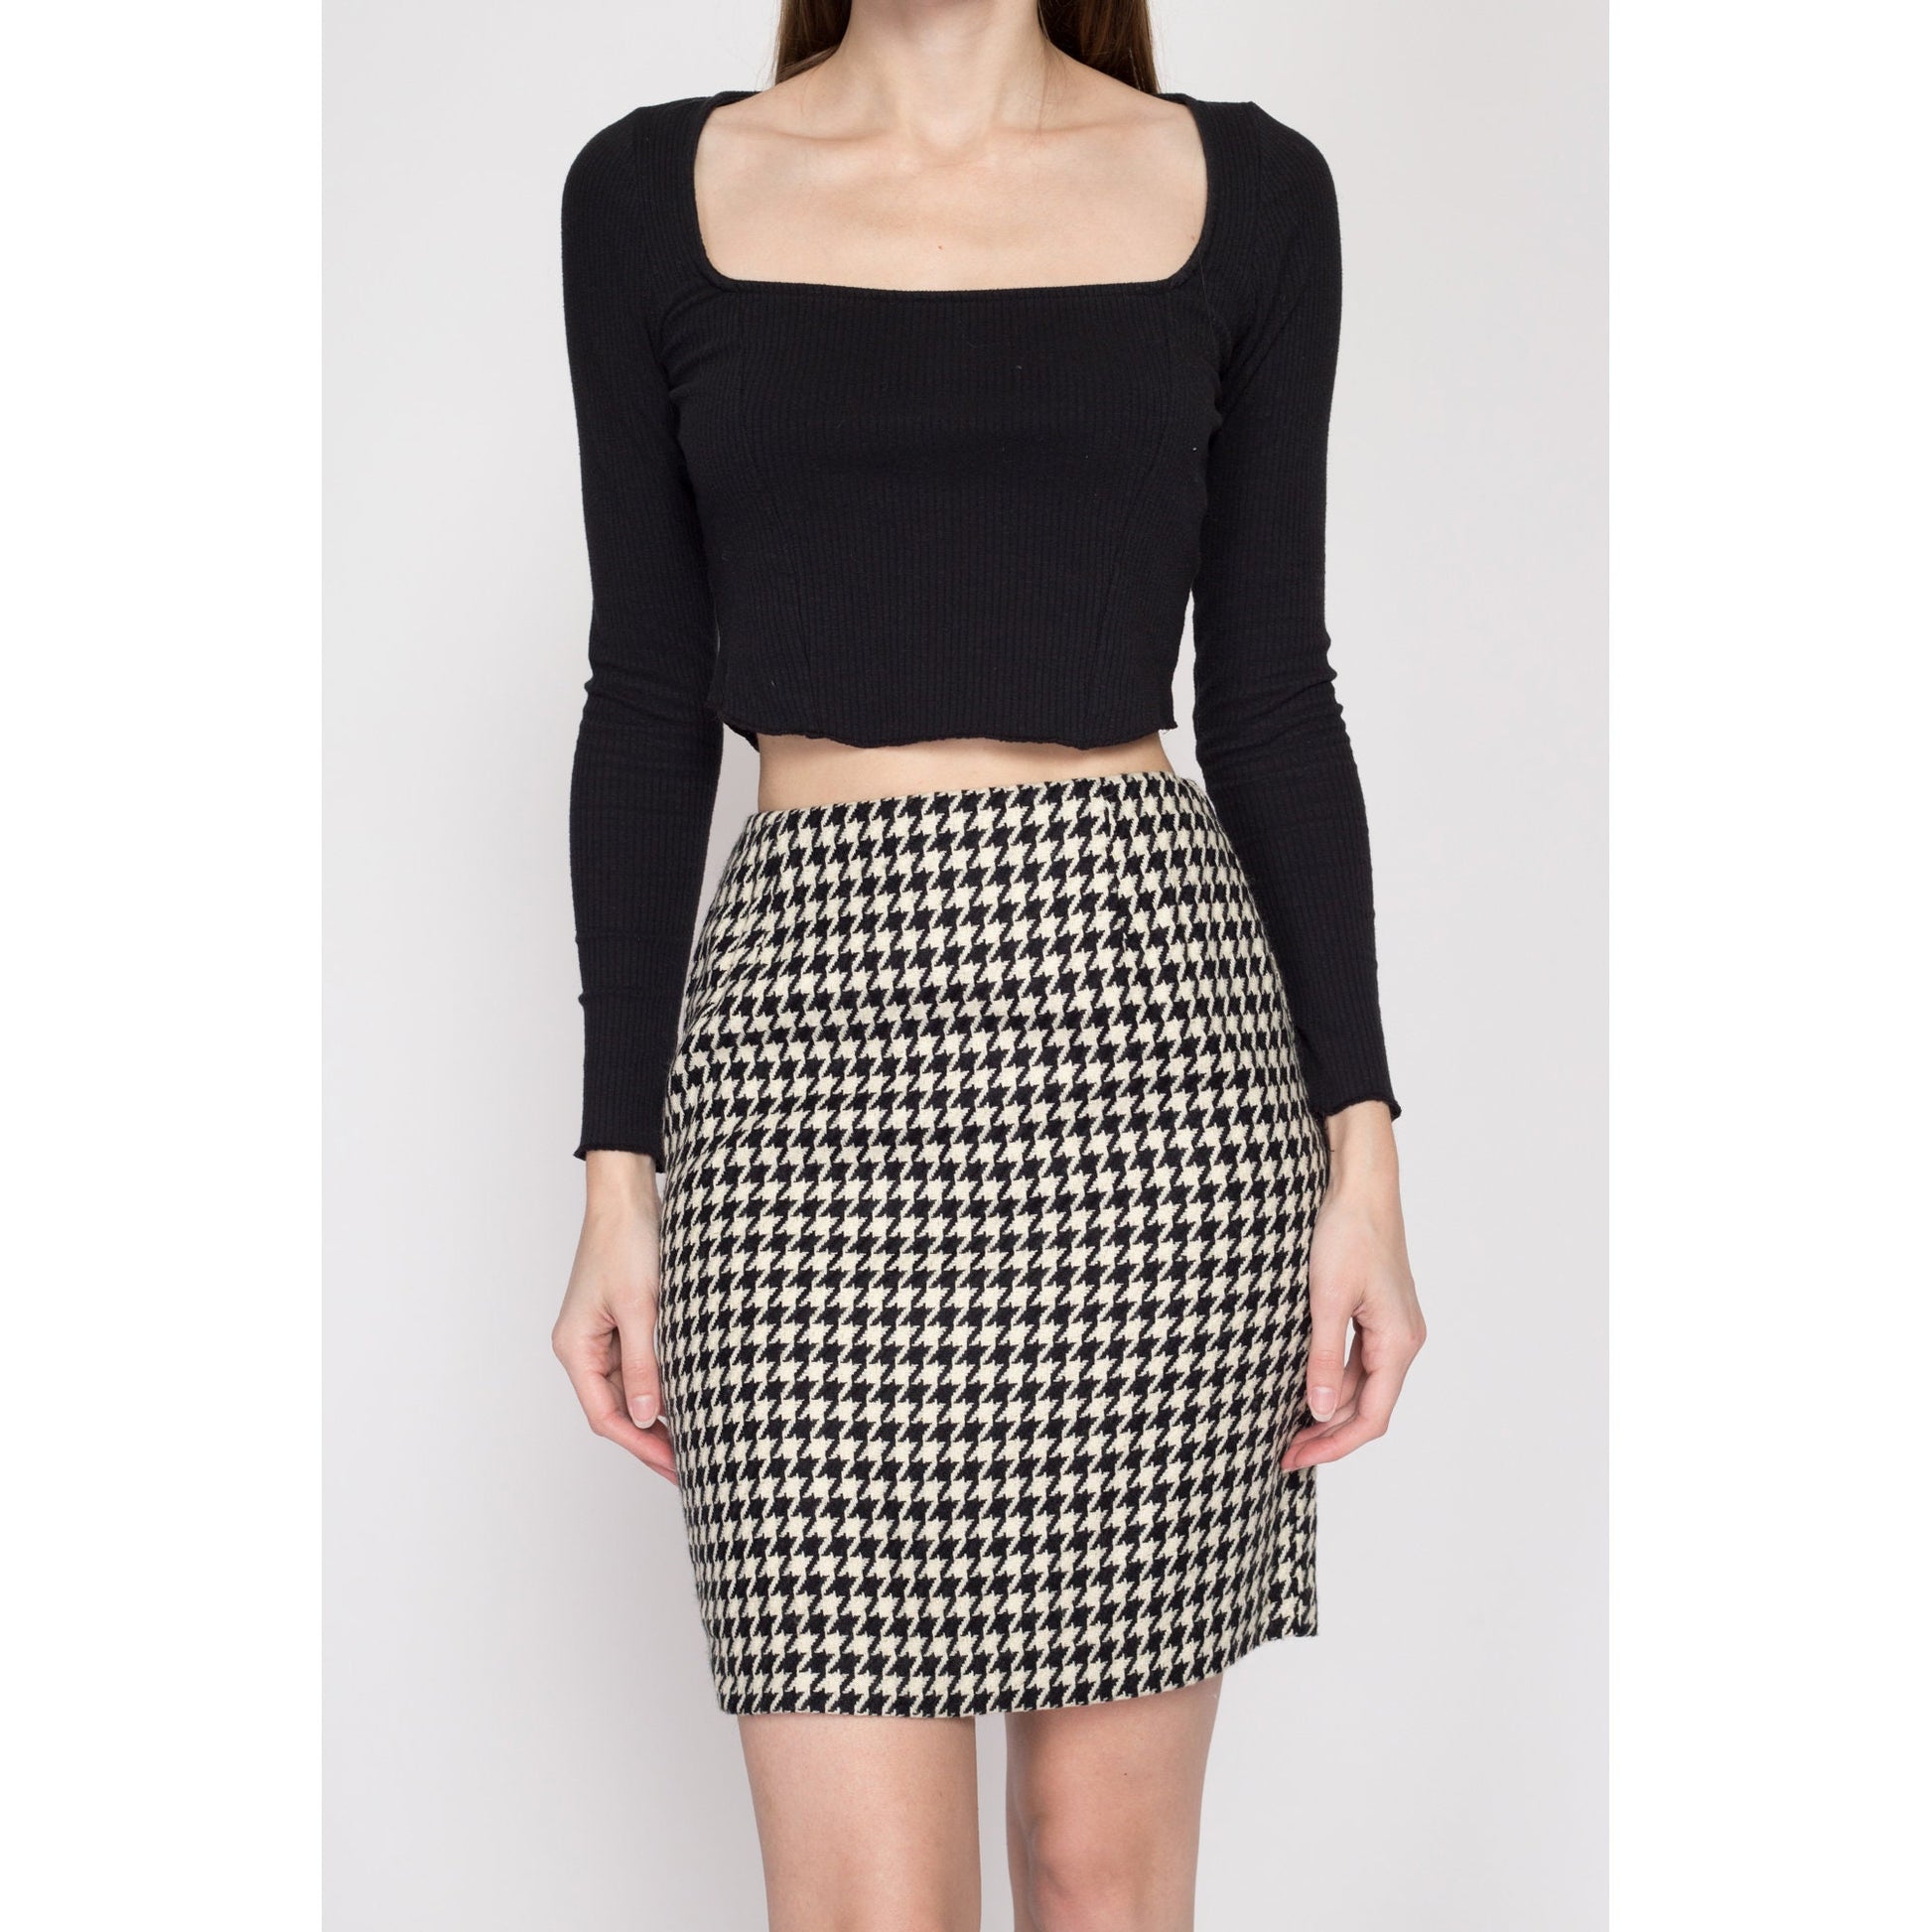 XS 90s Hugo Buscati Houndstooth Mini Skirt 24.5" | Vintage Black & White High Waisted Fitted Pencil Skirt